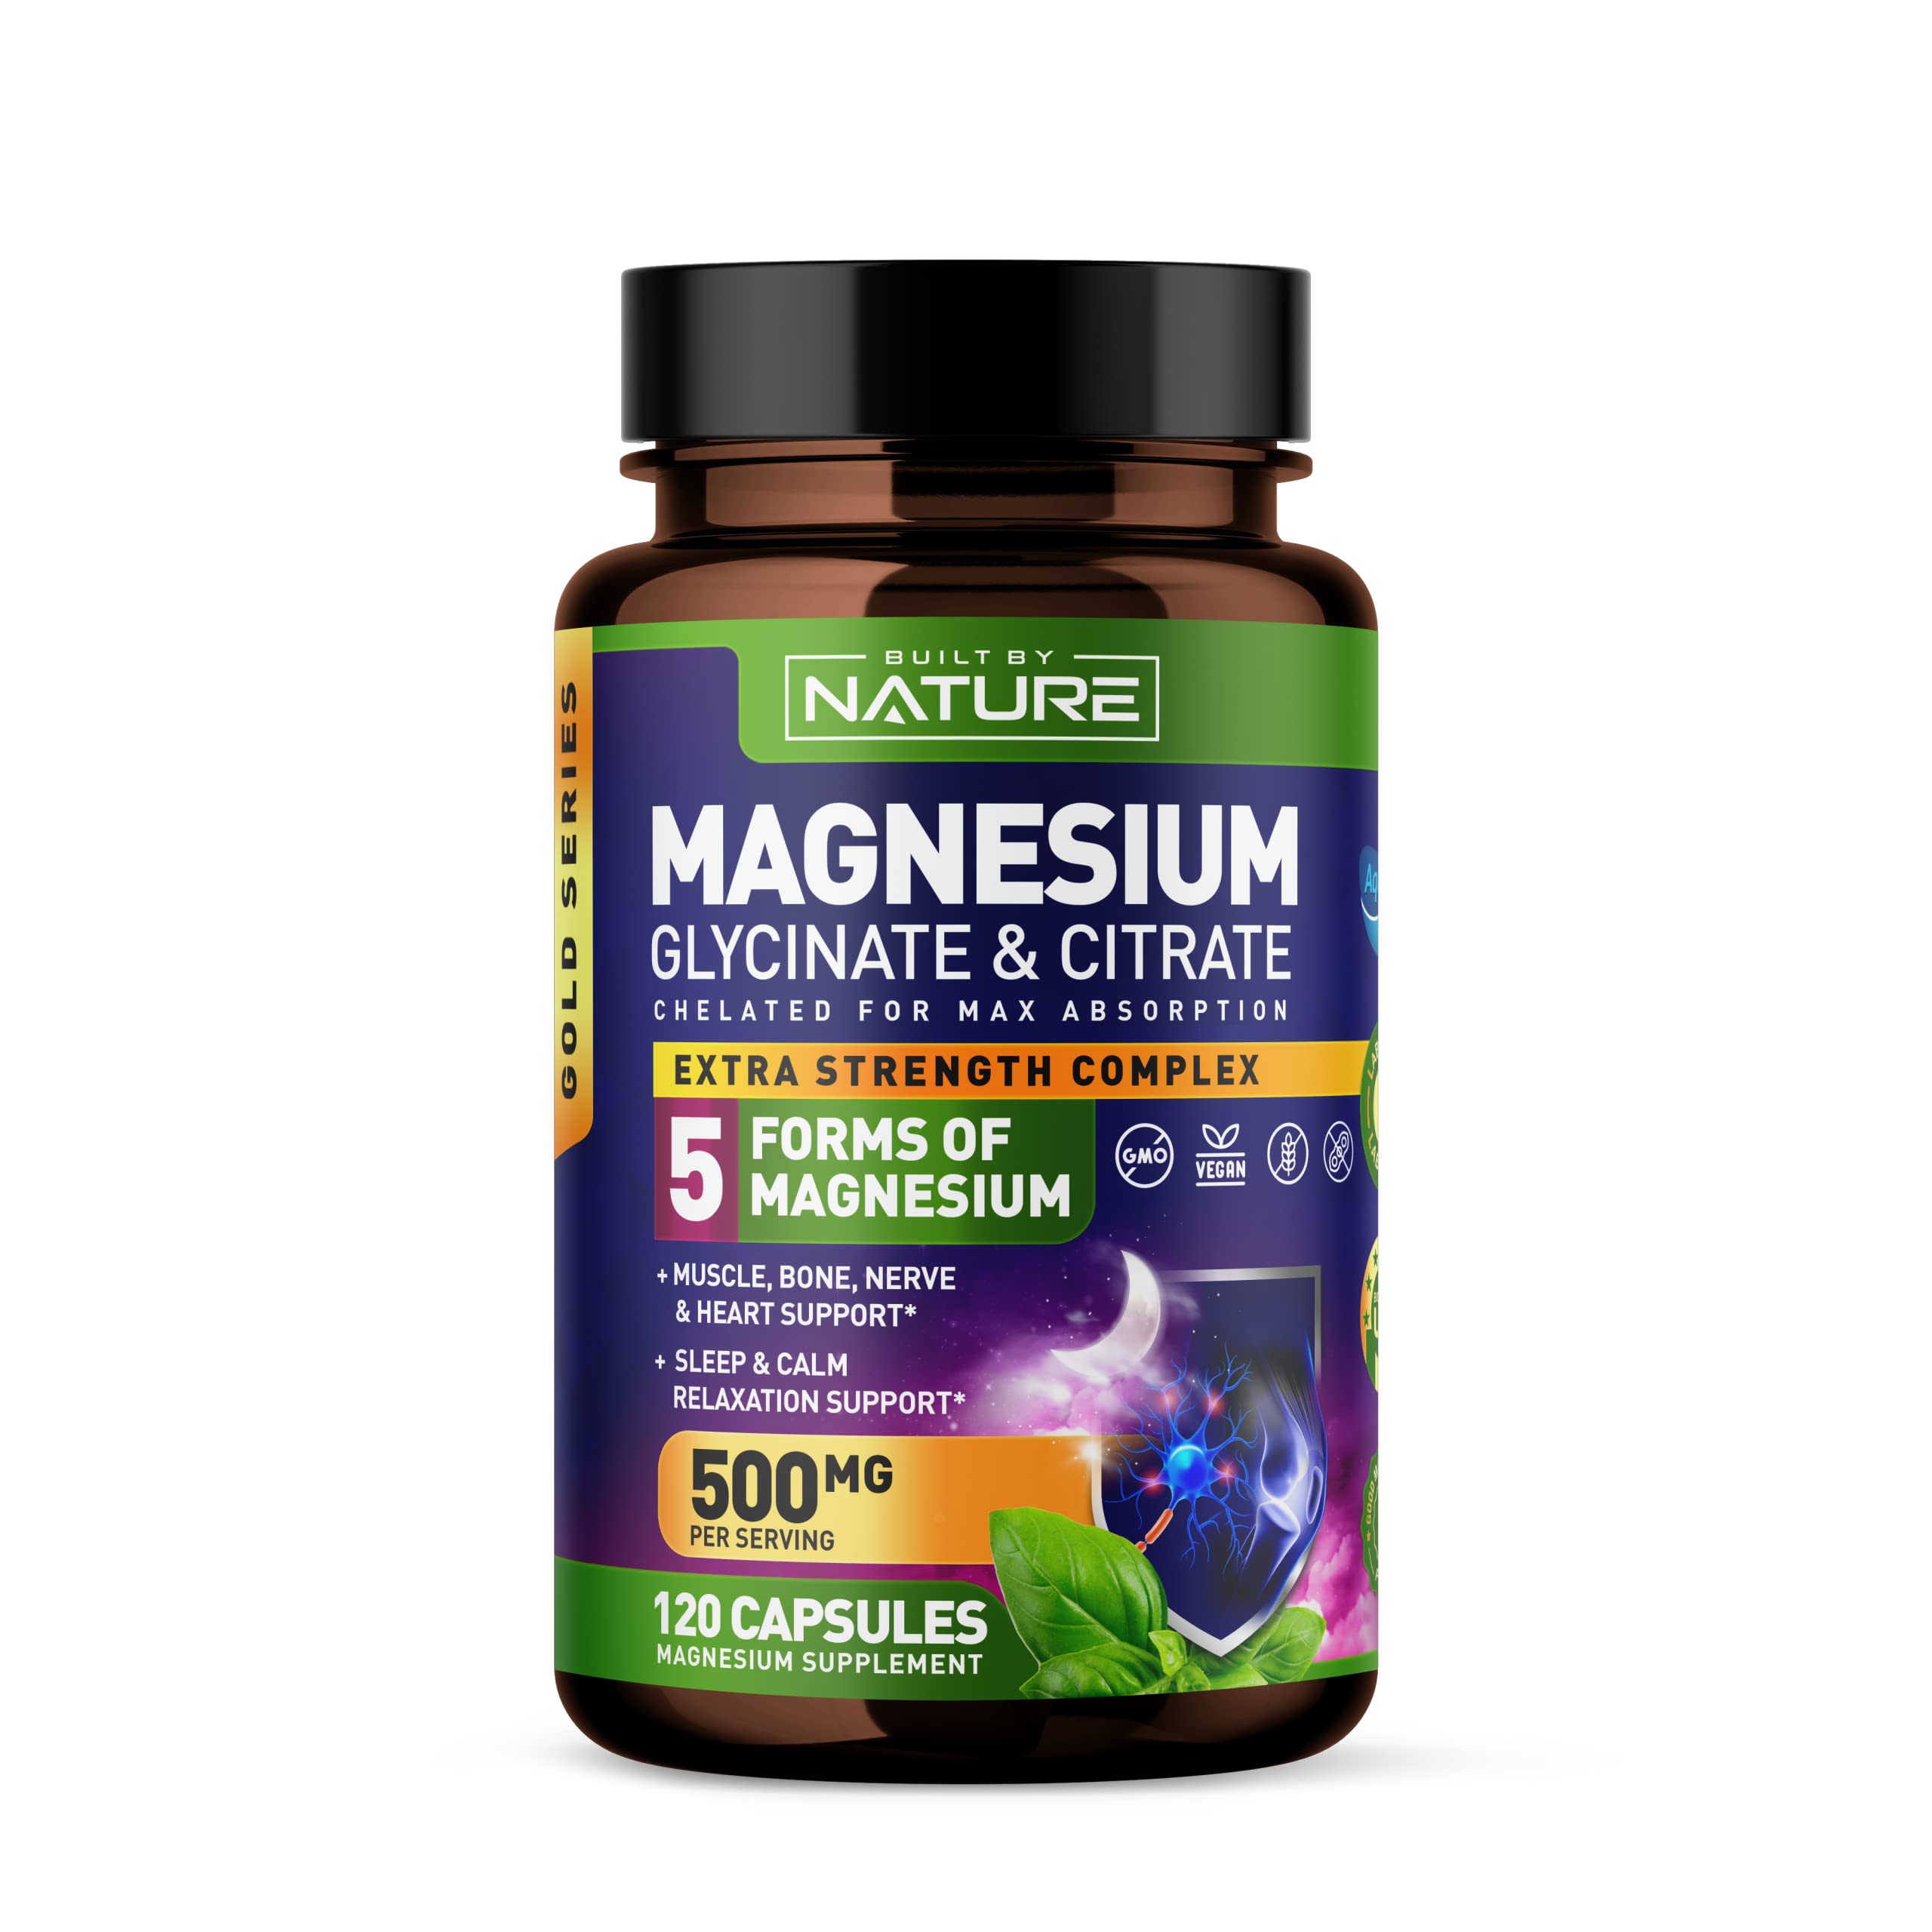 Magnesium Complex 500mg - 5 Forms of Magnesium Glycinate, Citrate, Malate, Oxide & Aquamin with 72 Trace Minerals - Chelated for Absorption - Supplement for Muscle, Nerve, Heart & Sleep